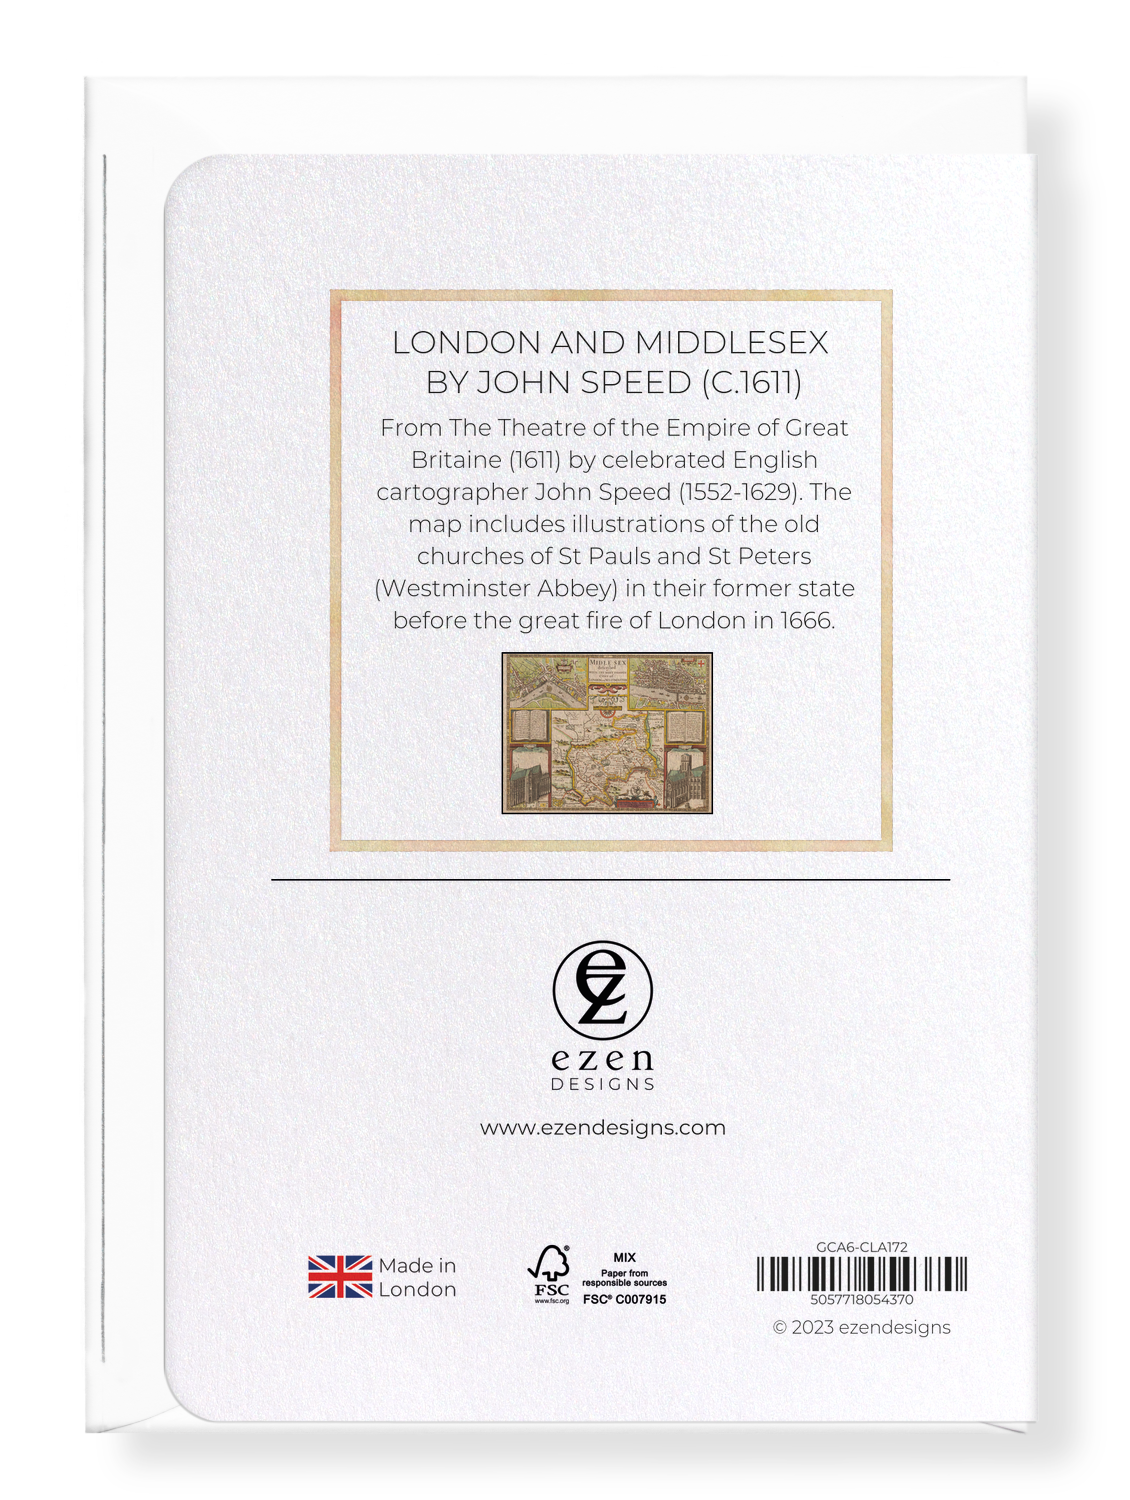 Ezen Designs - London and Middlesex by John Speed (c.1611) - Greeting Card - Back